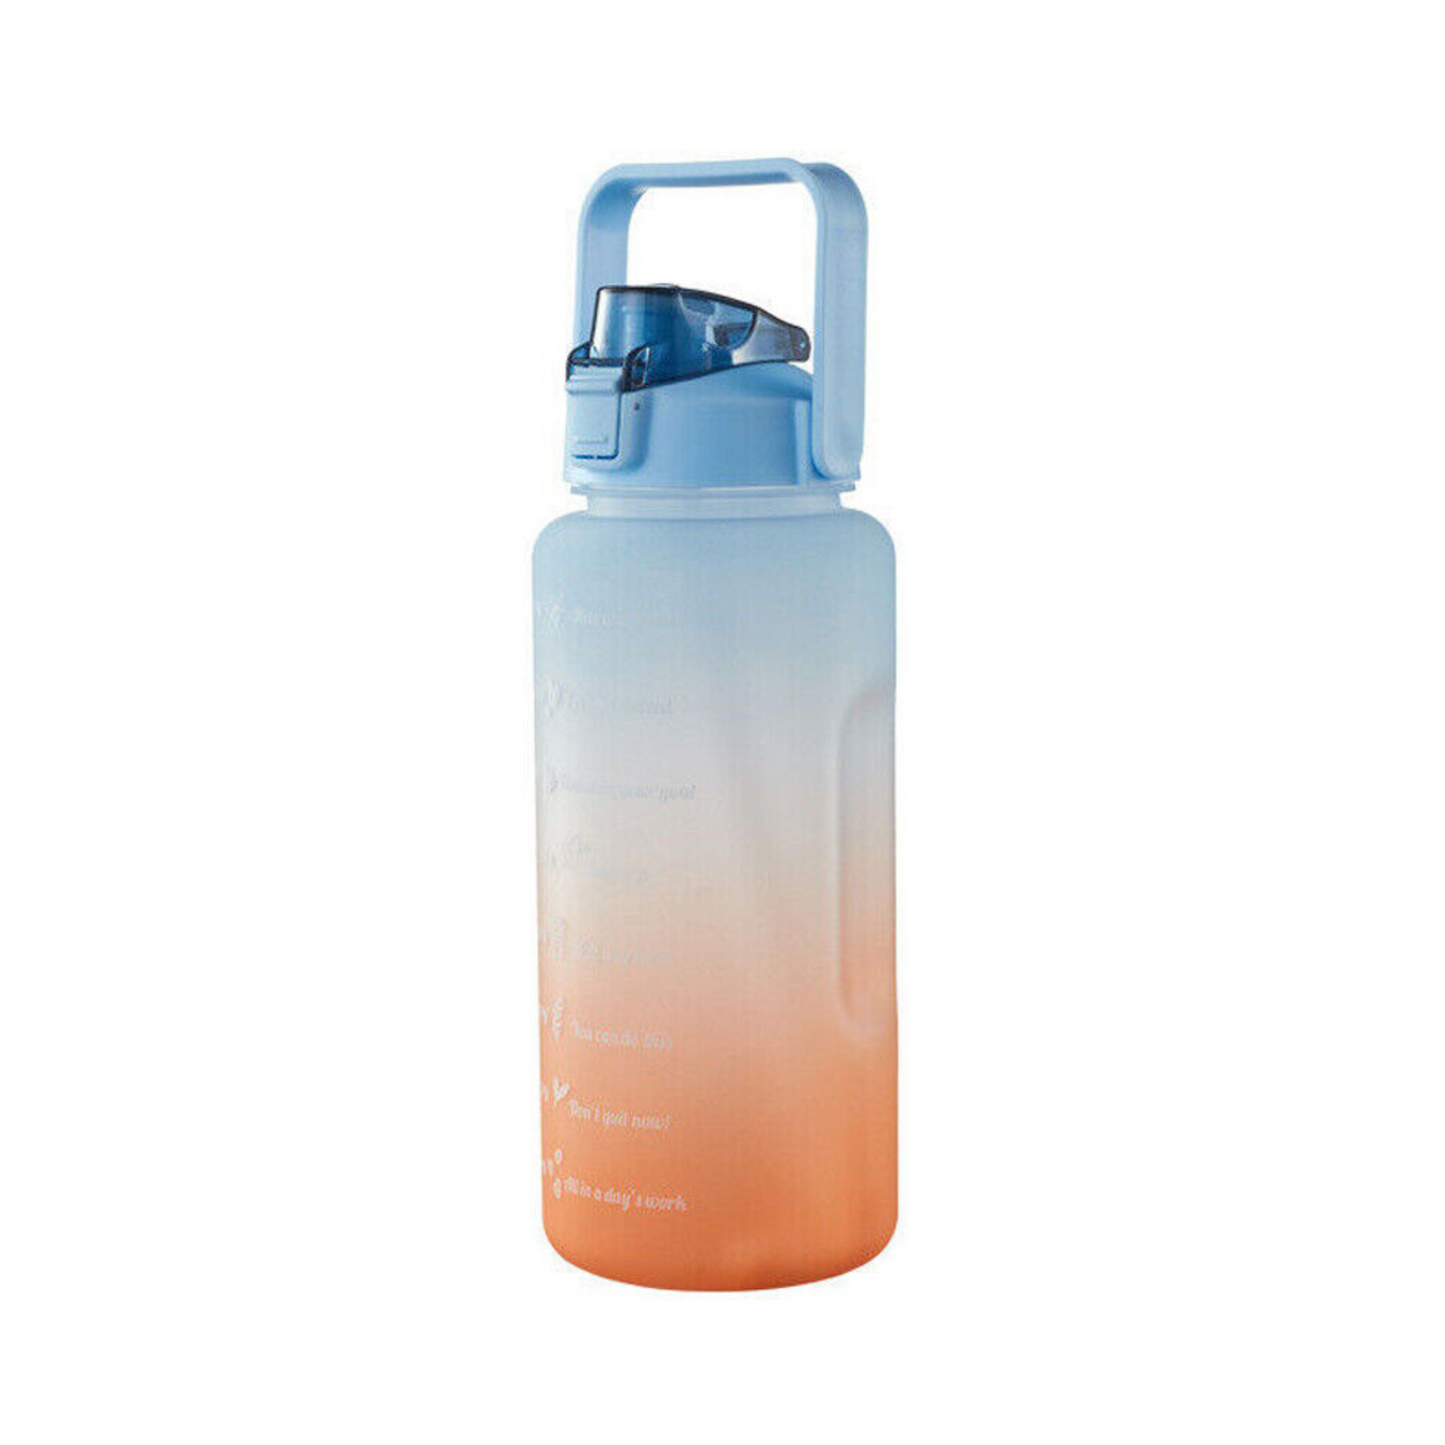 Stay motivated with this Blue and Orange Gradient Half Gallon Water Bottle